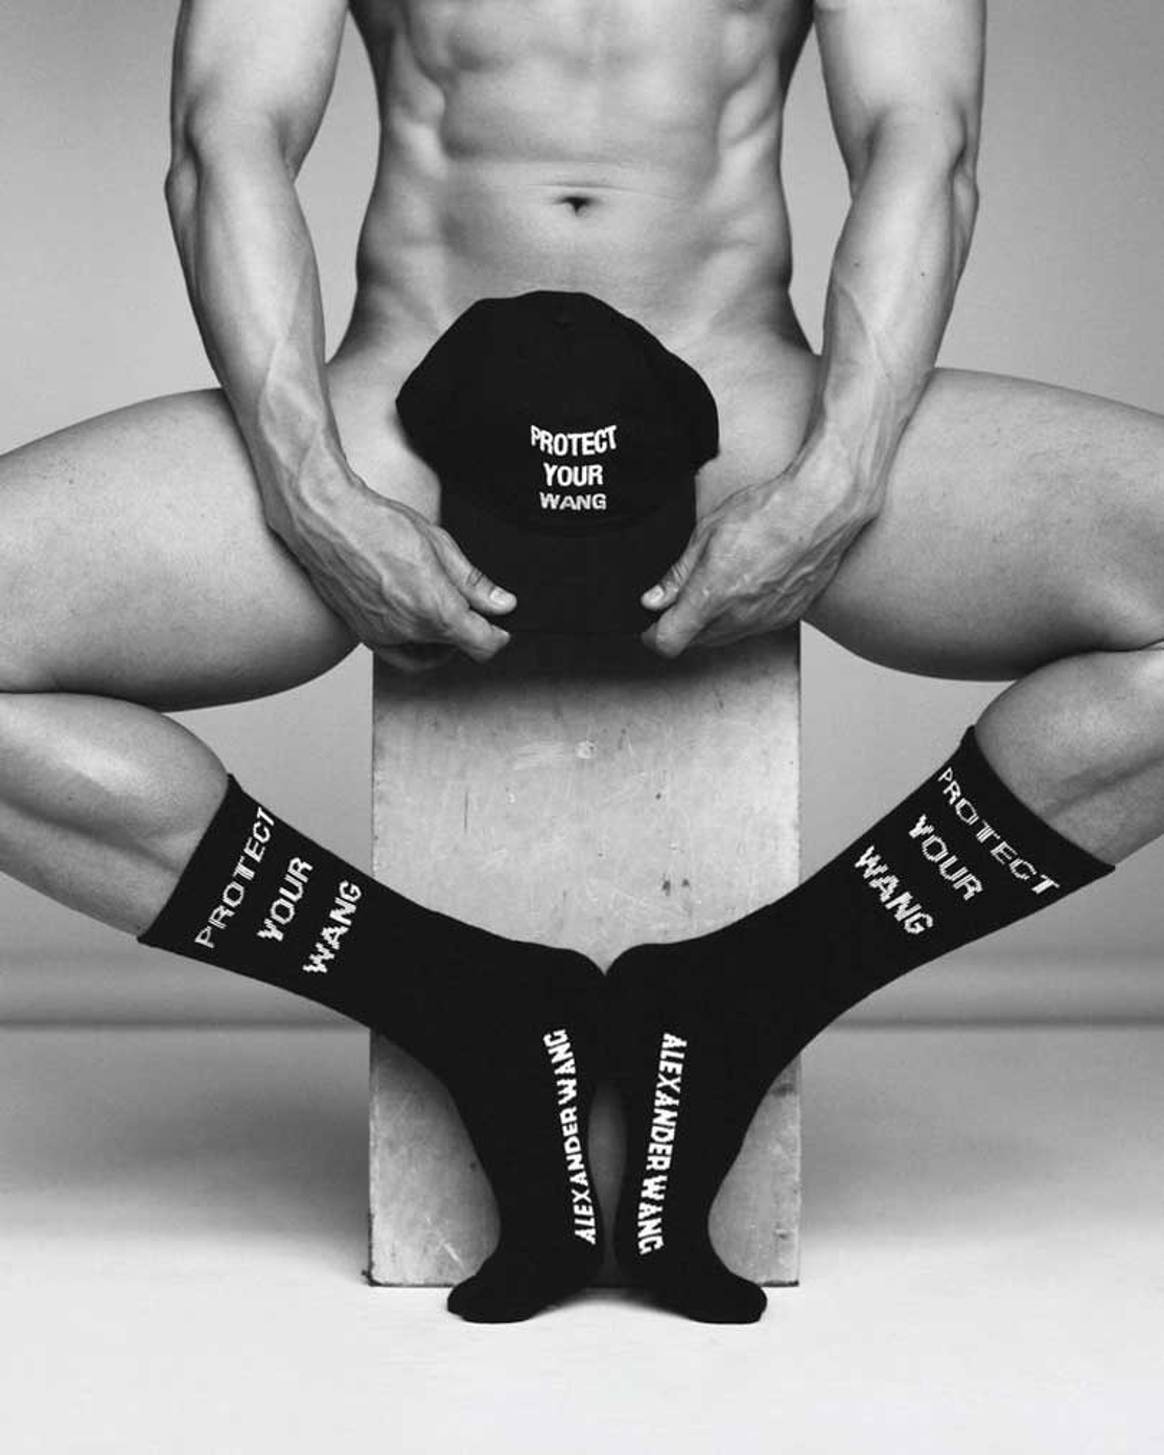 Alexander Wang launches Pride capsule collection in campaign for Trojan condoms